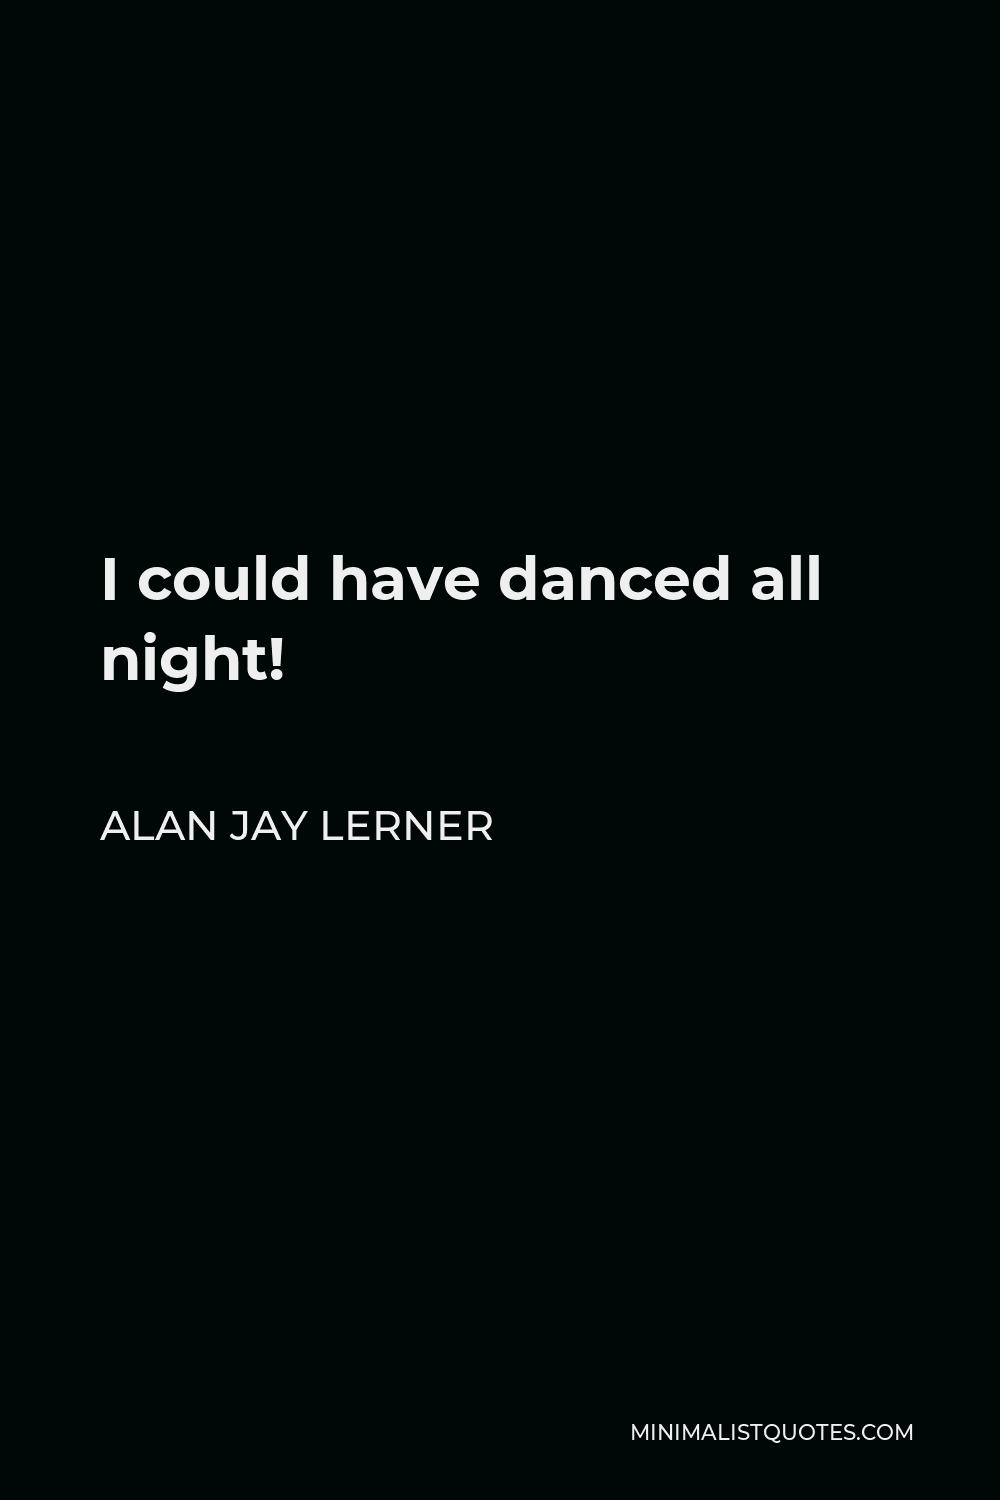 Alan Jay Lerner Quote - I could have danced all night!